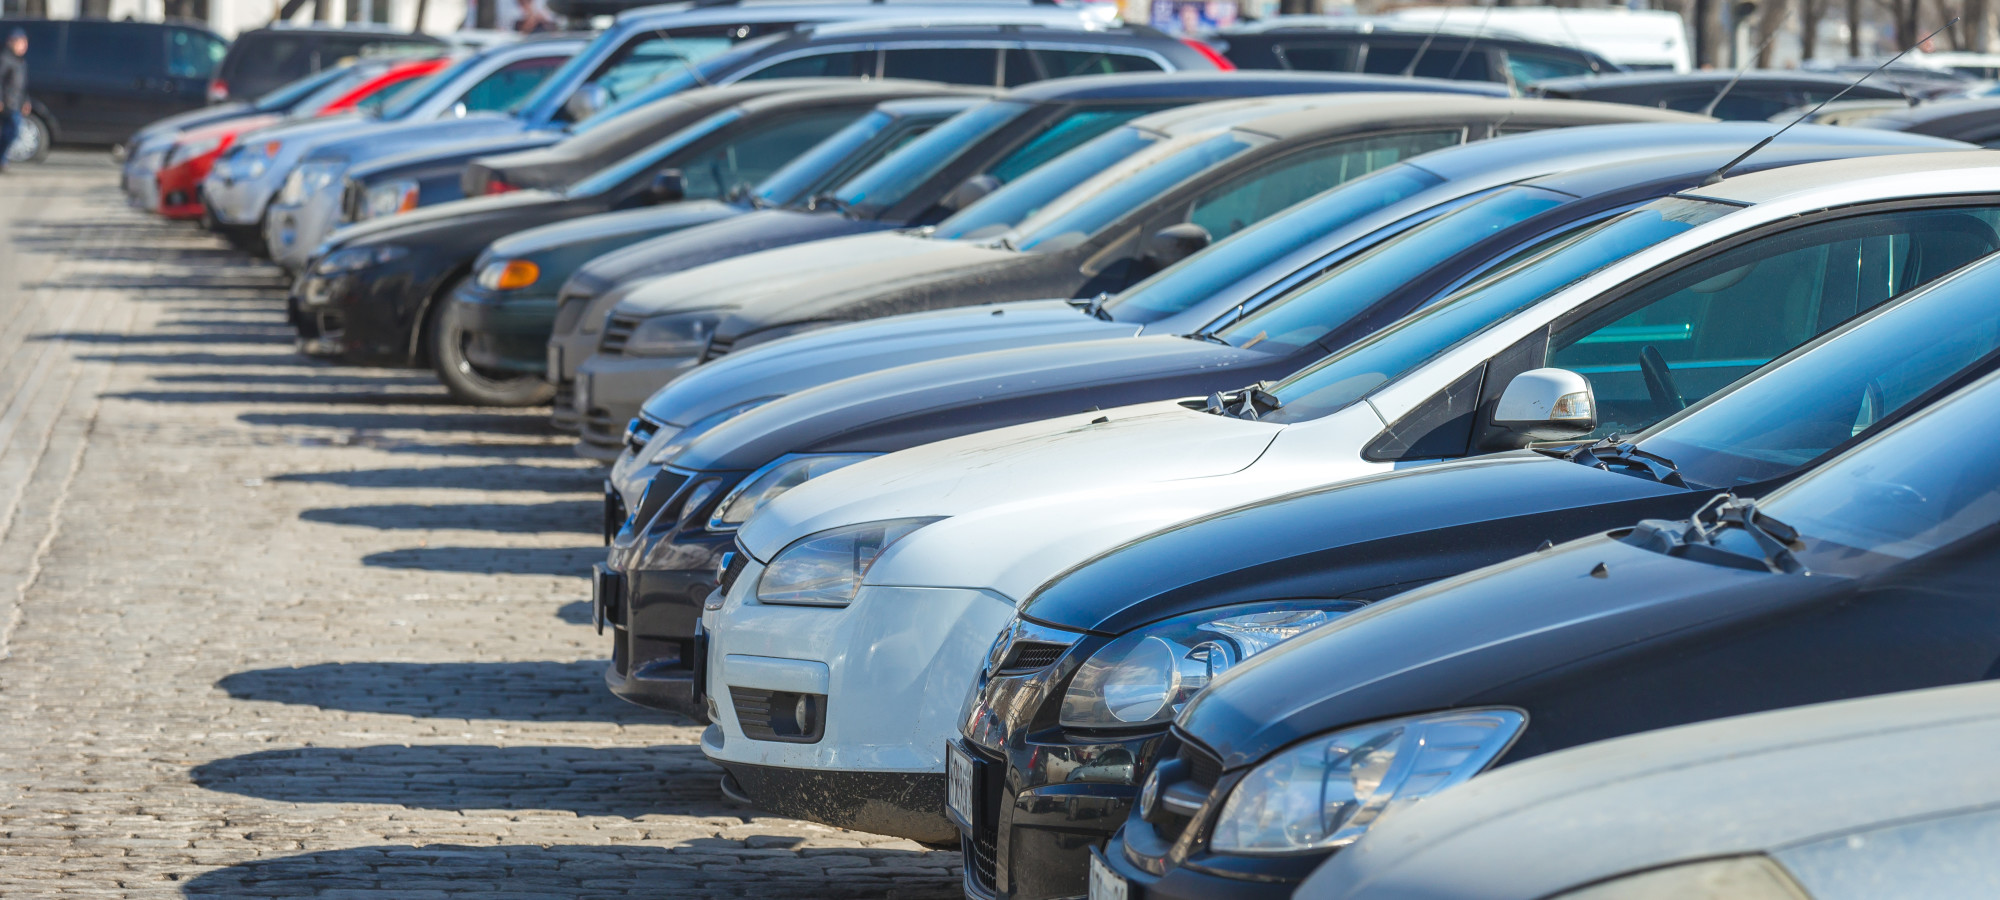 Finding the Right Used Vehicle